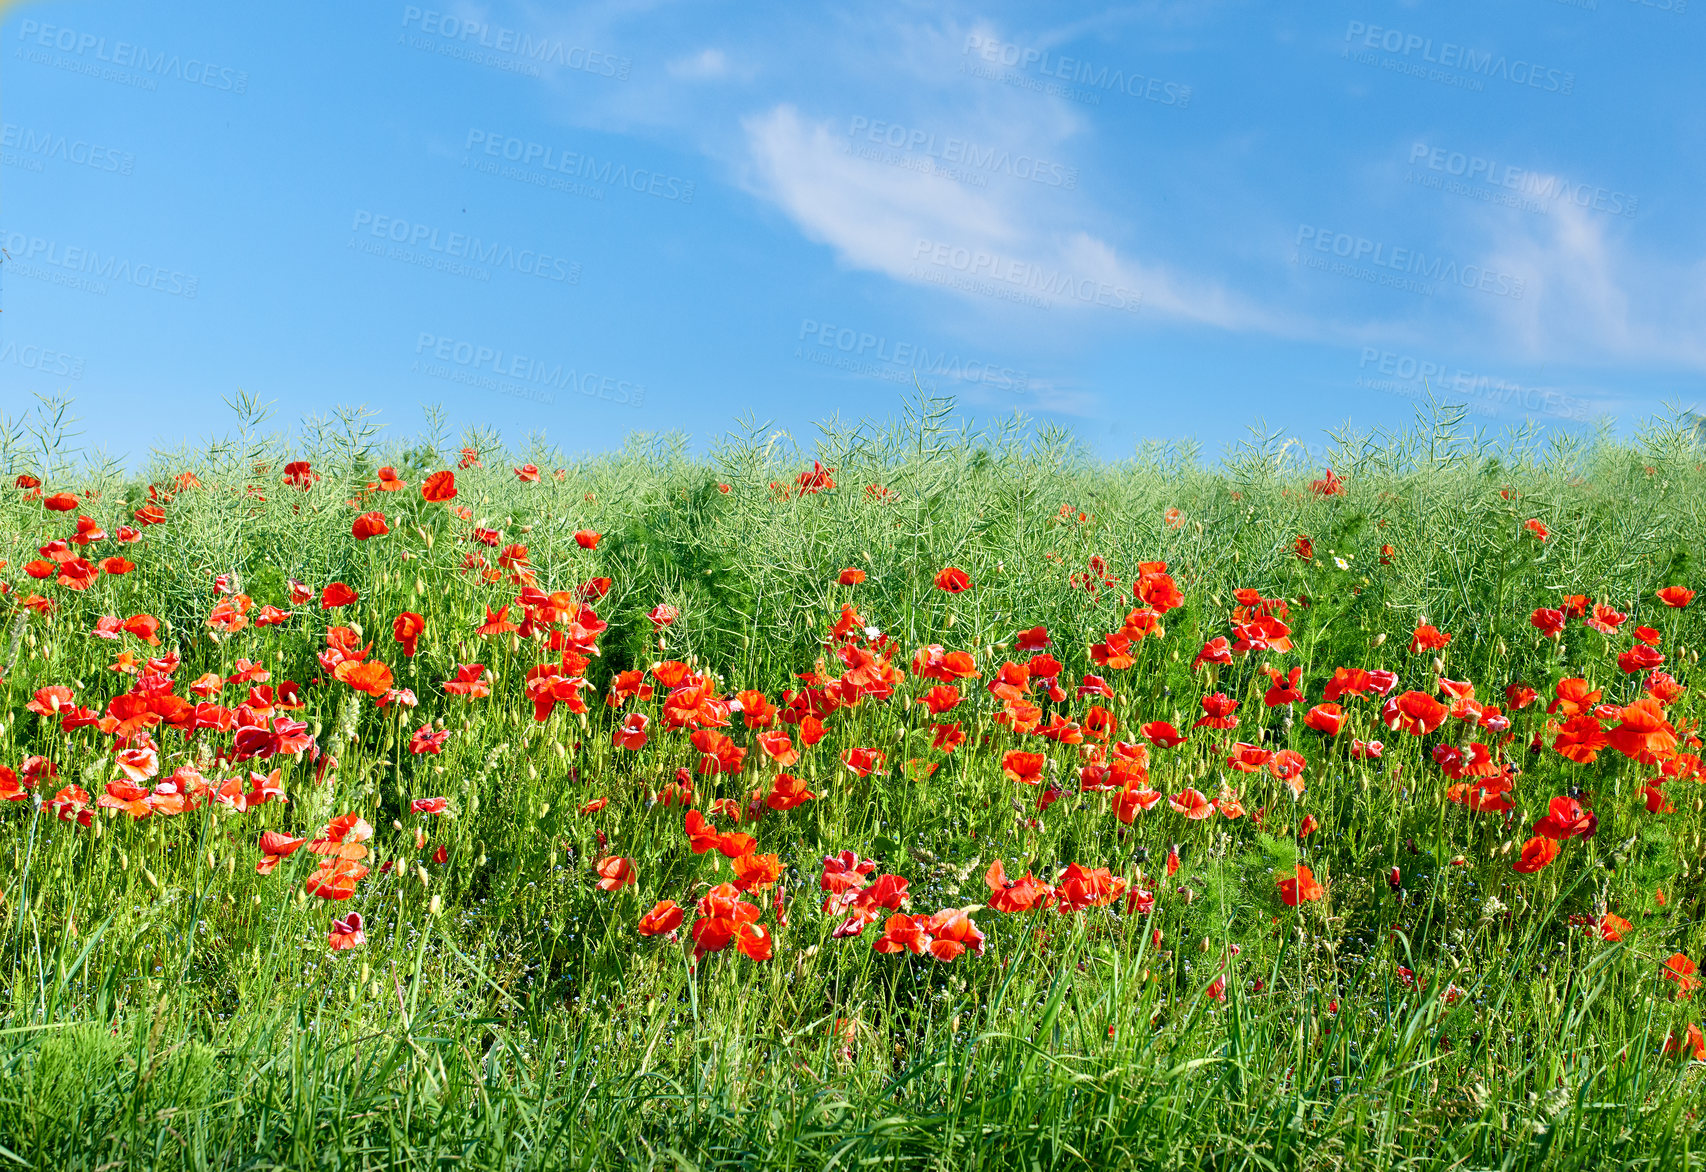 Buy stock photo Red poppies in an open field with copyspace. Flowers growing amongst the tall grass outside. Natural beauty in nature against a clear blue sky showing the horizon. A sunny summer day